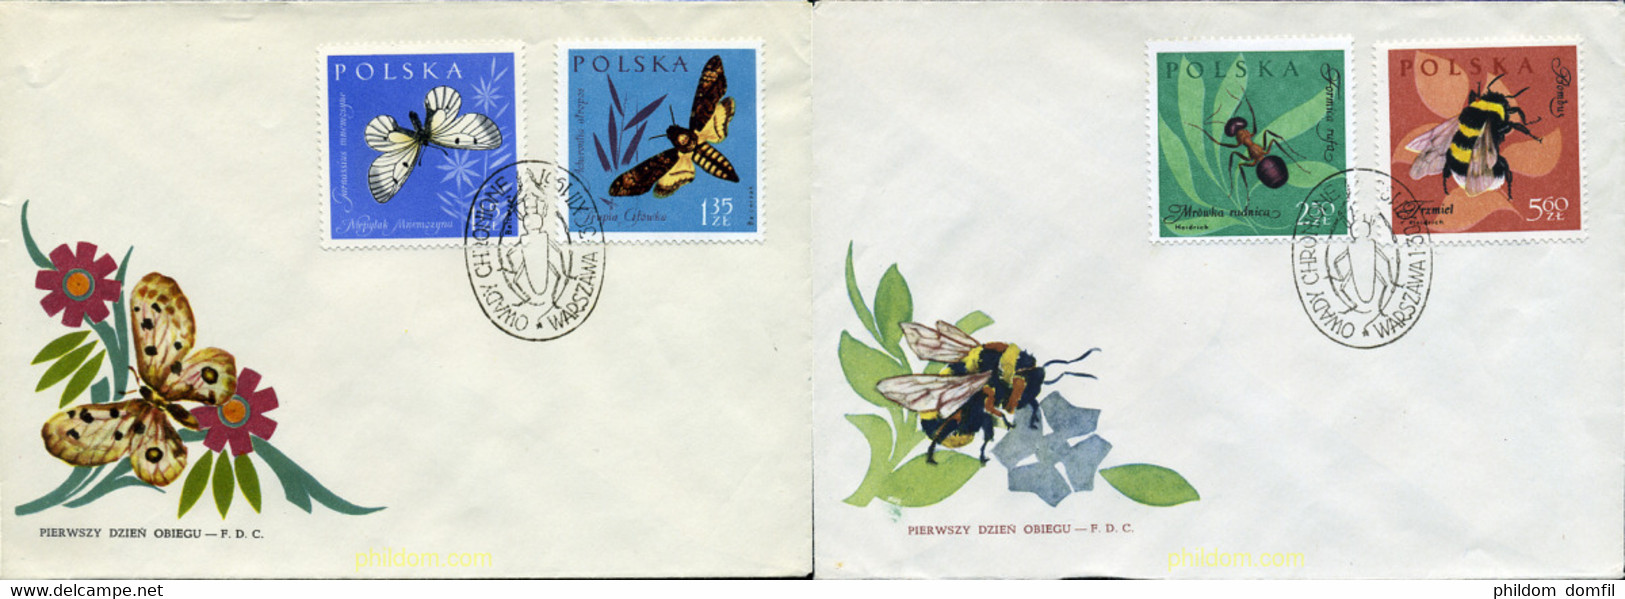 285243 MNH POLONIA 1961 INSECTOS - Unclassified